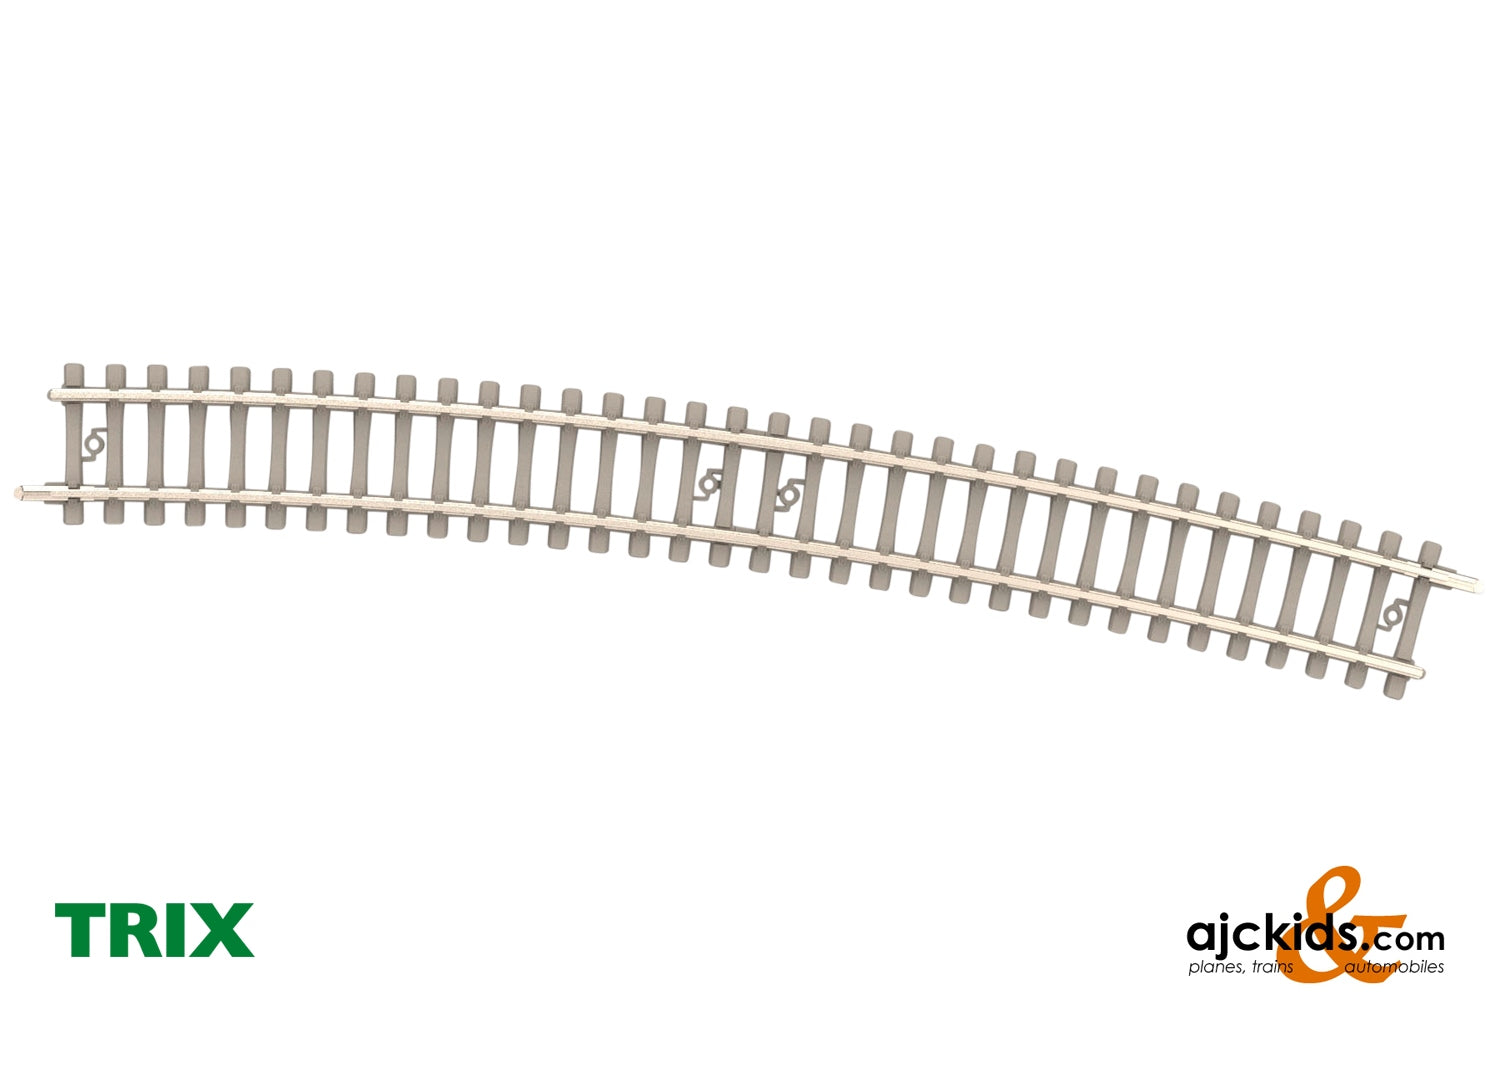 Trix 14528 - Curved Track with Concrete Ties